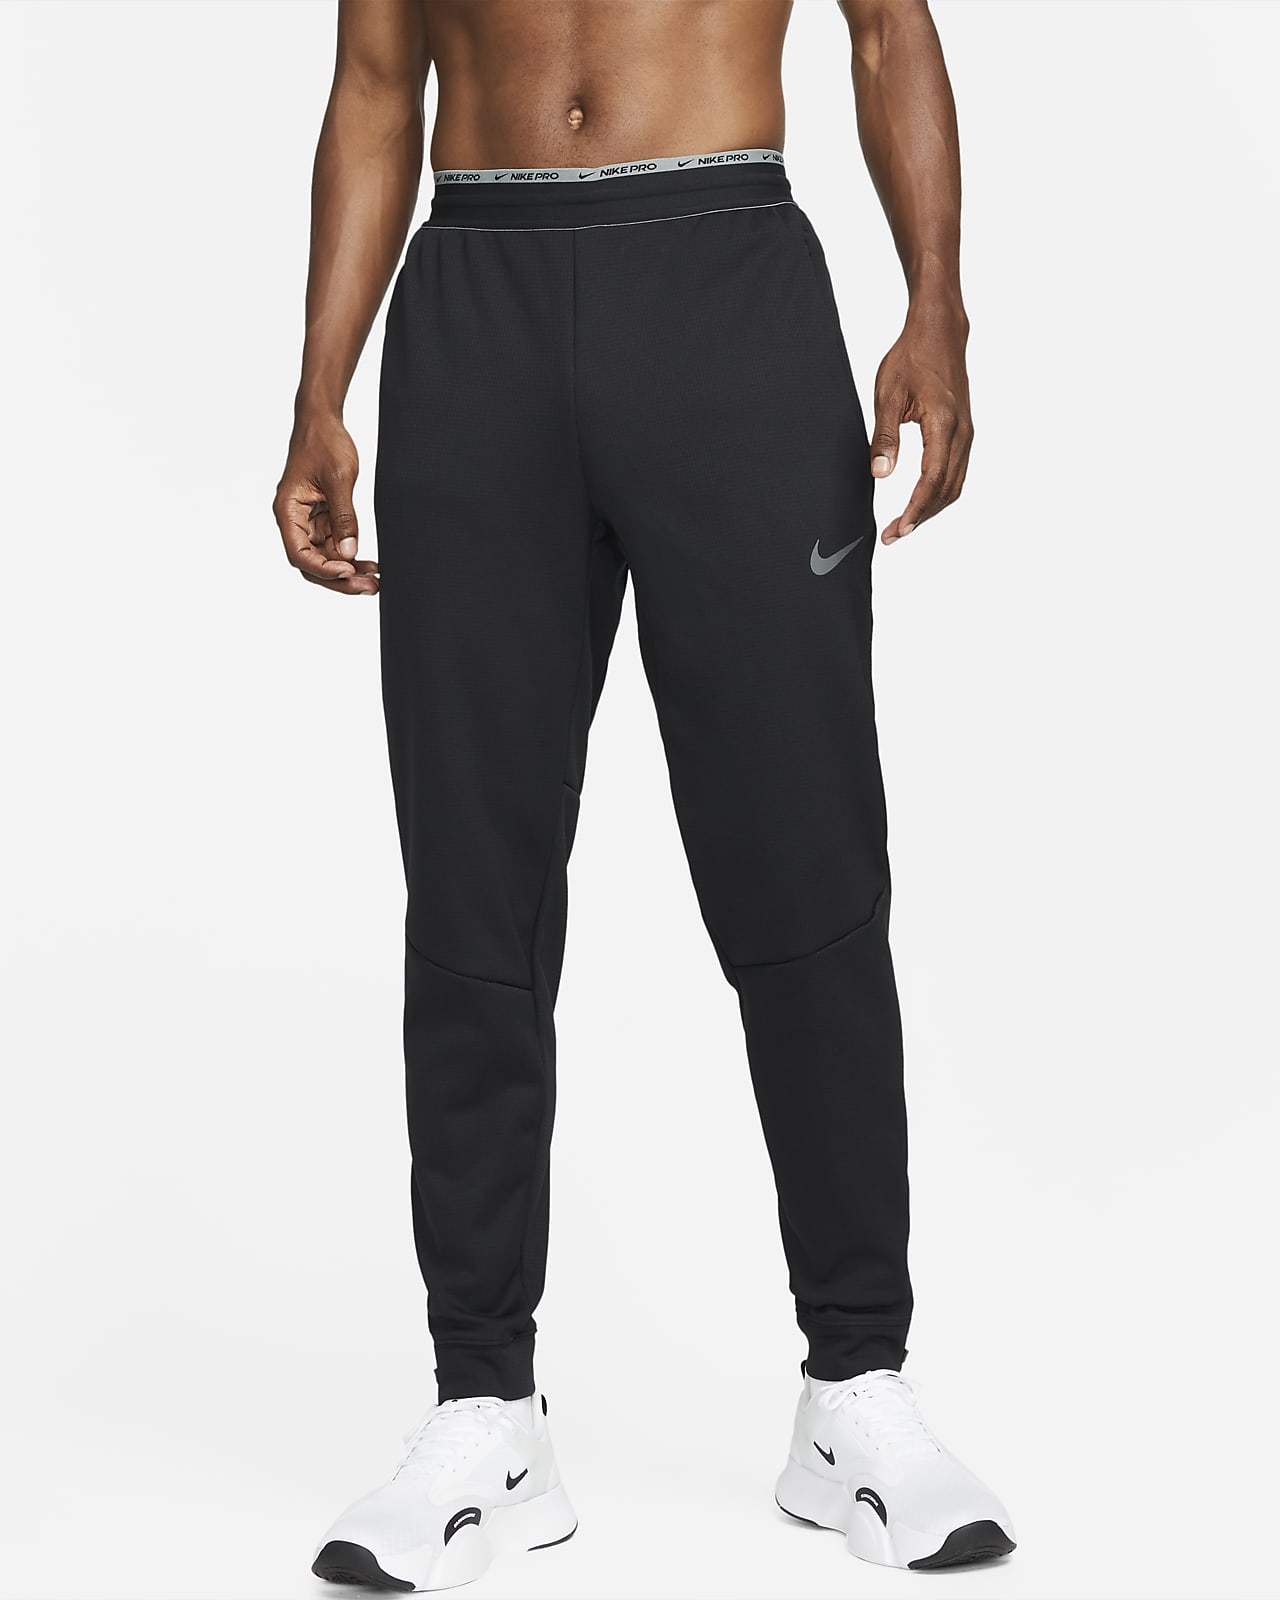 Nike Men's Therma-FIT Fitness Crew.